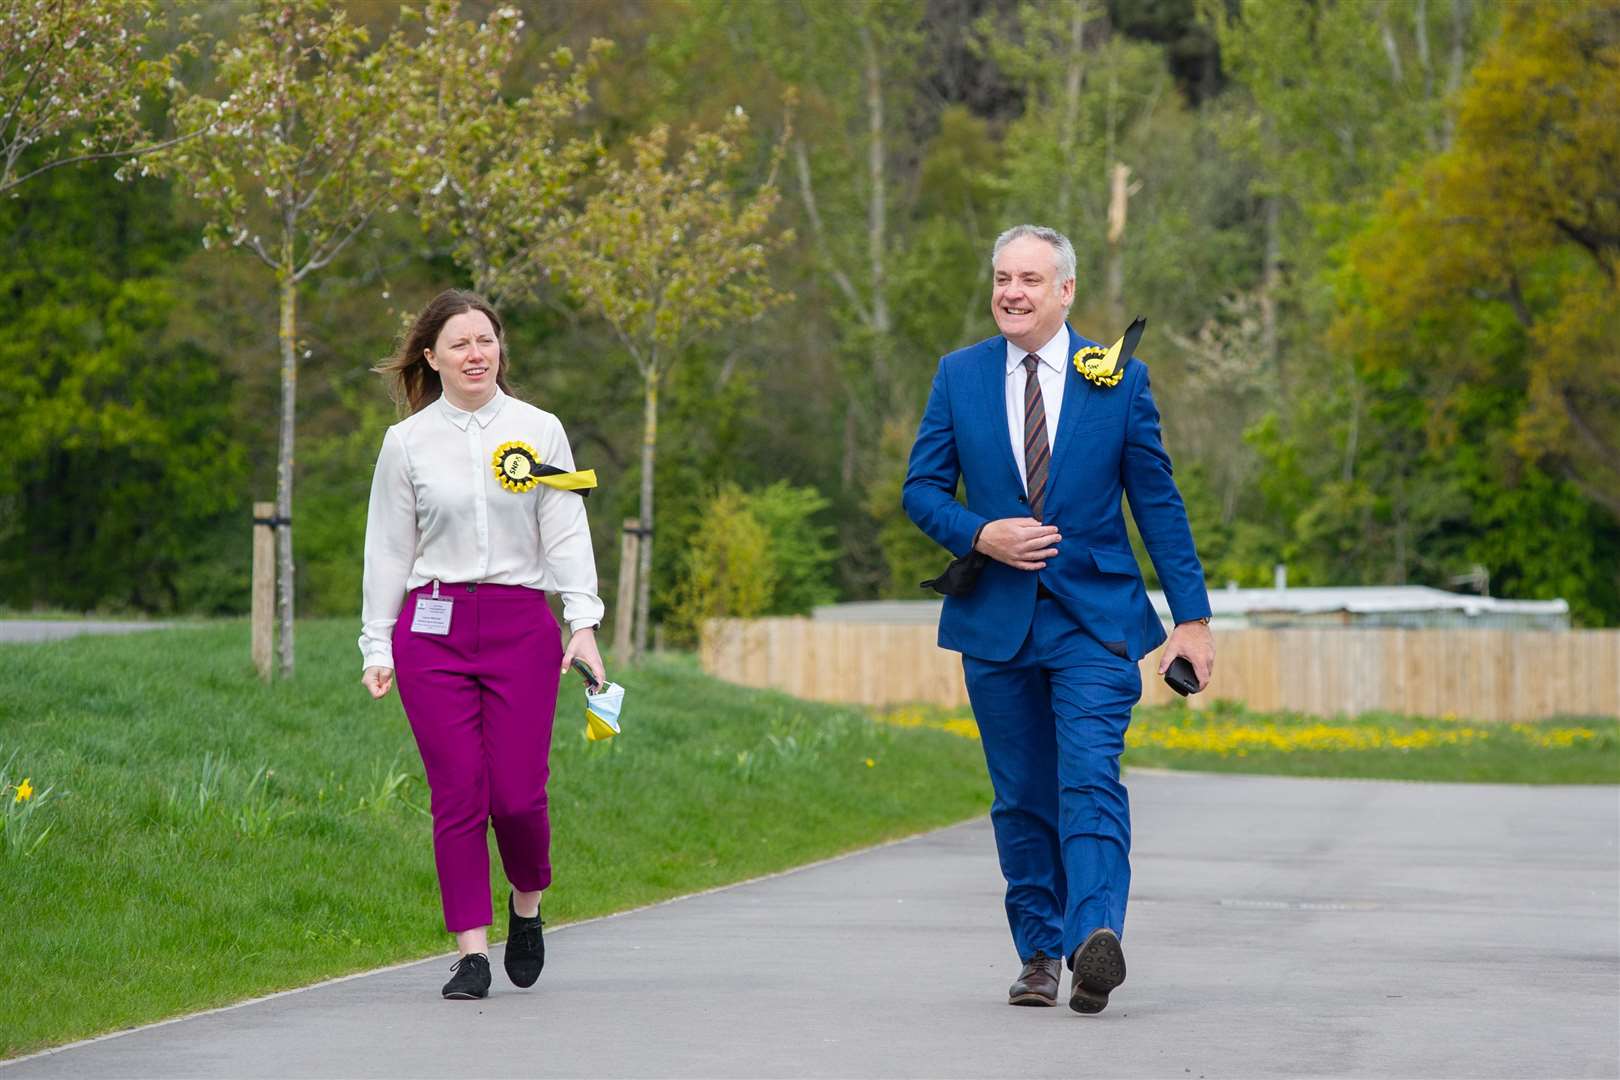 Richard Lochhead, Moray's SNP MSP, arrives at the Regional Count on Saturday morning with his agent Laura Mitchell following a period of precautionary self-isolation...Moray's 2021 Scottish Election...Picture: Daniel Forsyth.